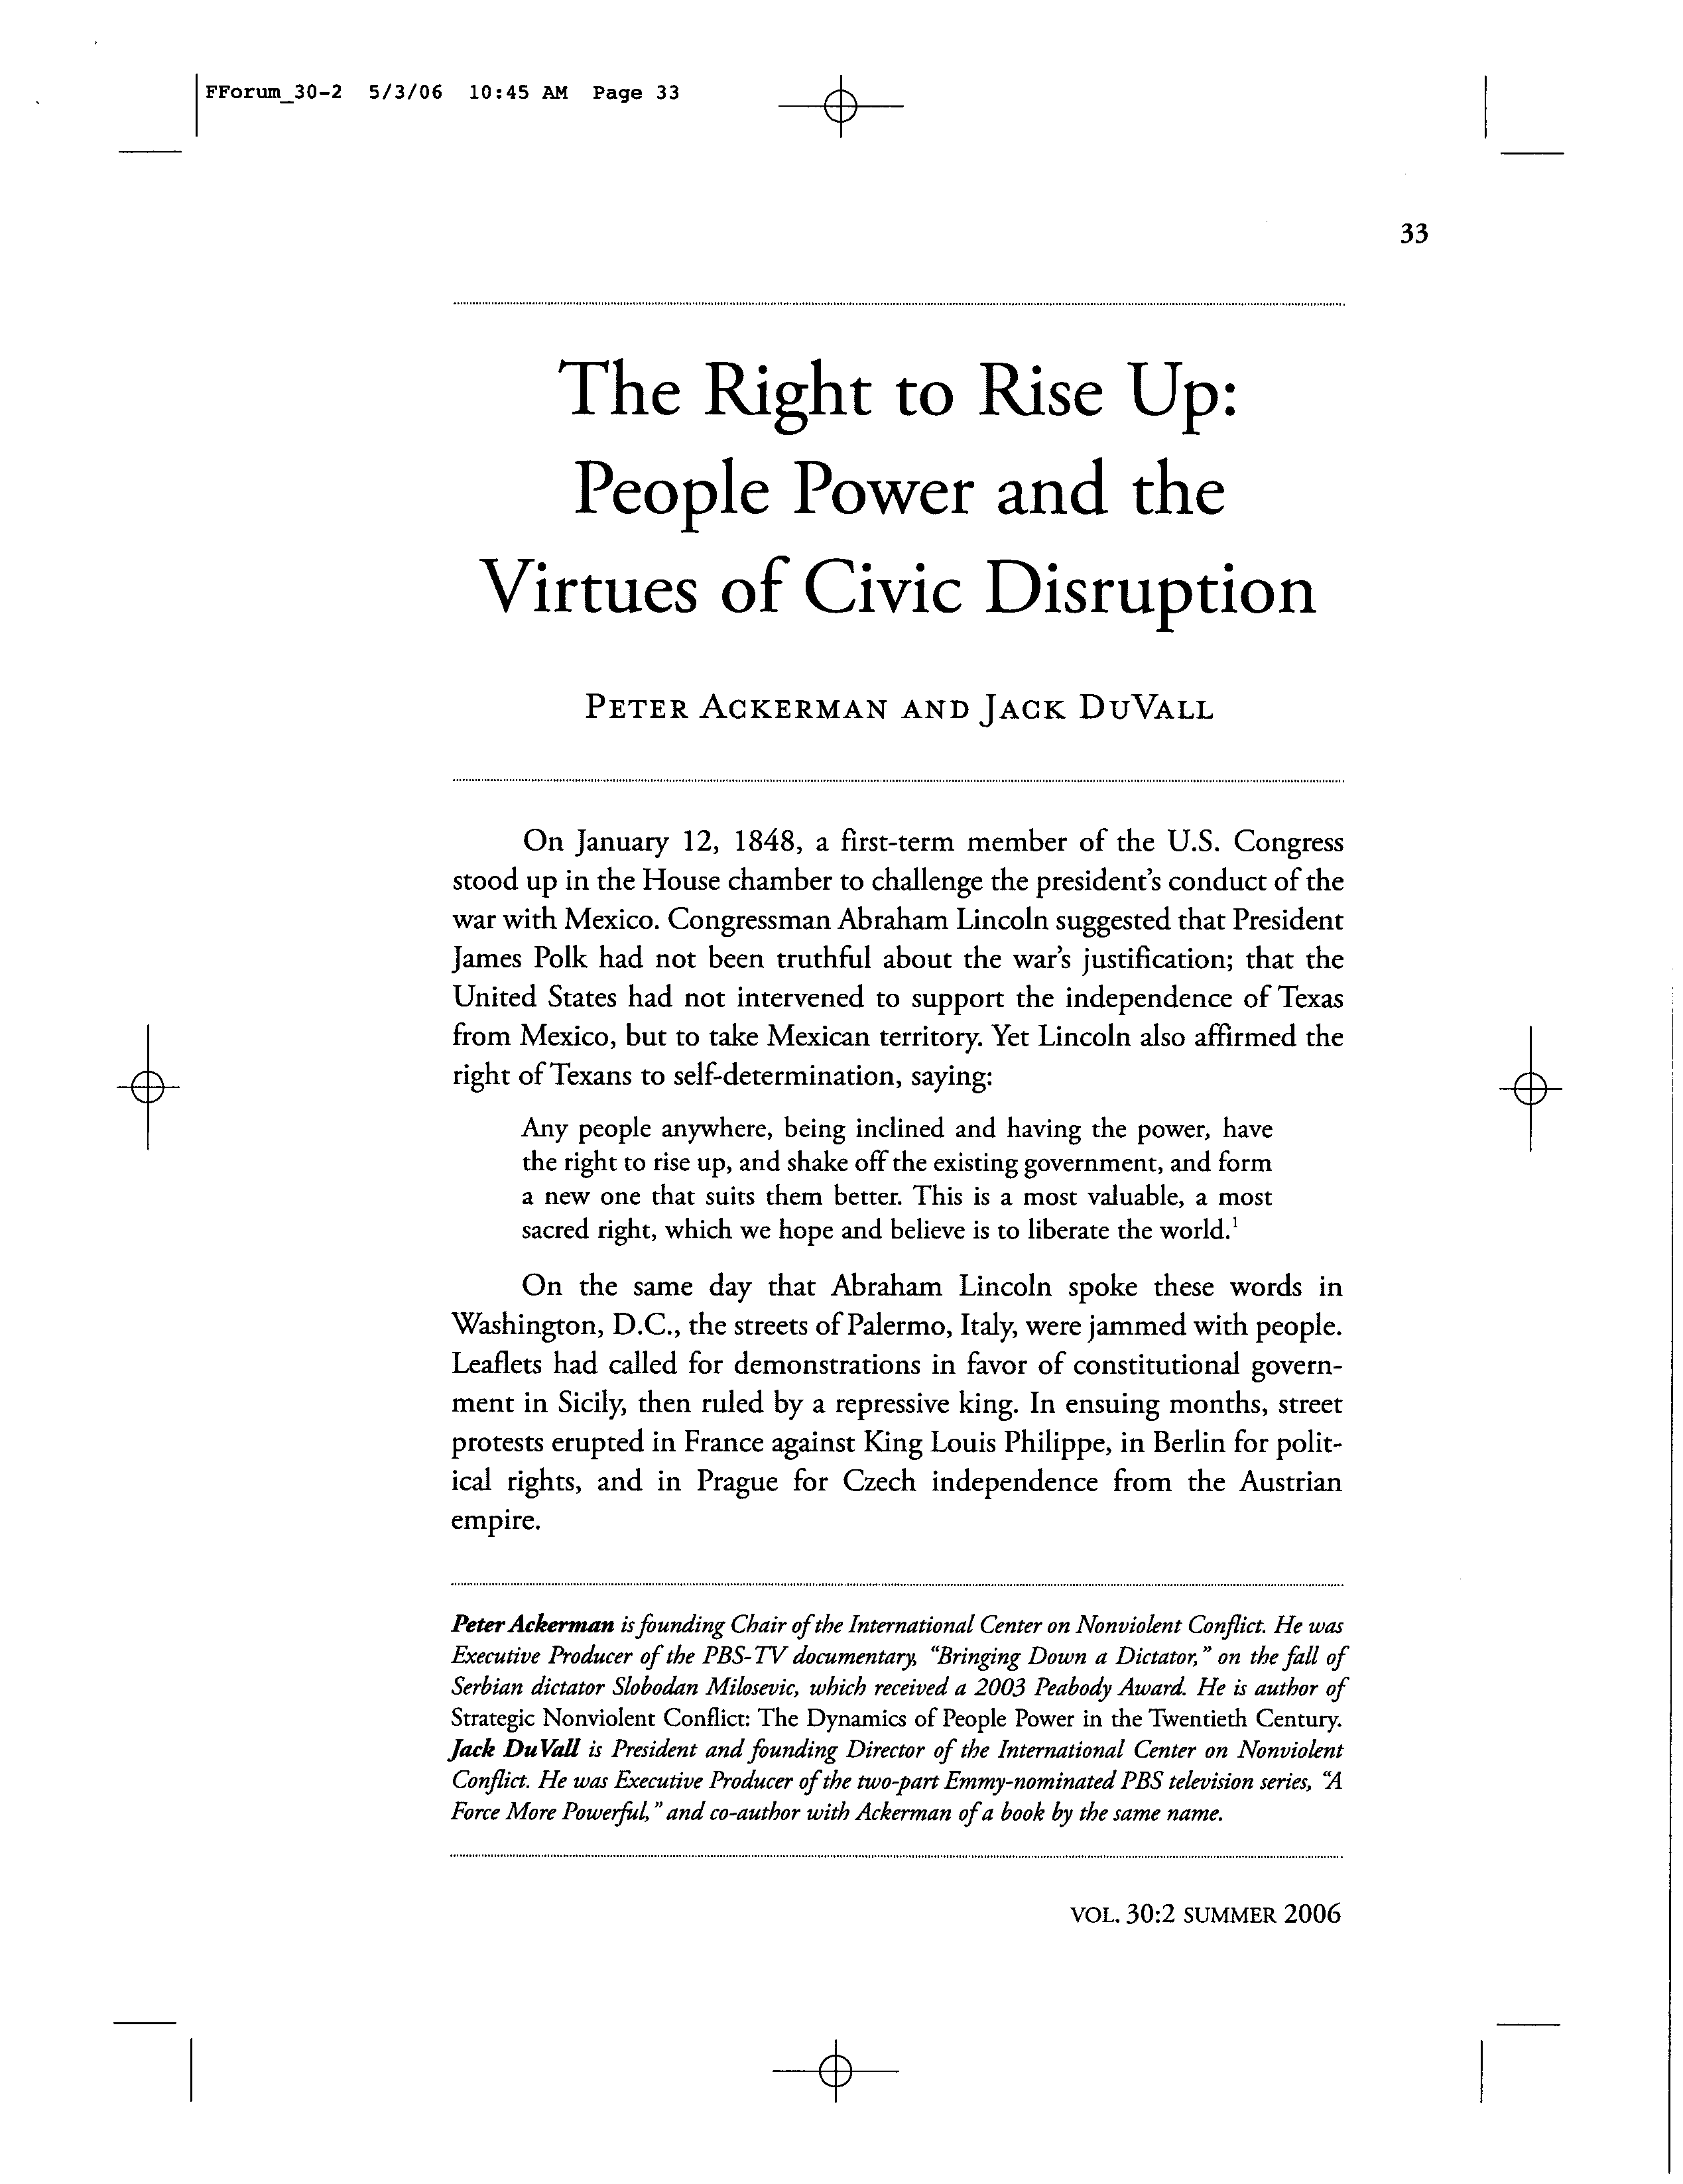 The Right to Rise Up: People Power and the Virtues of Civic Disruption